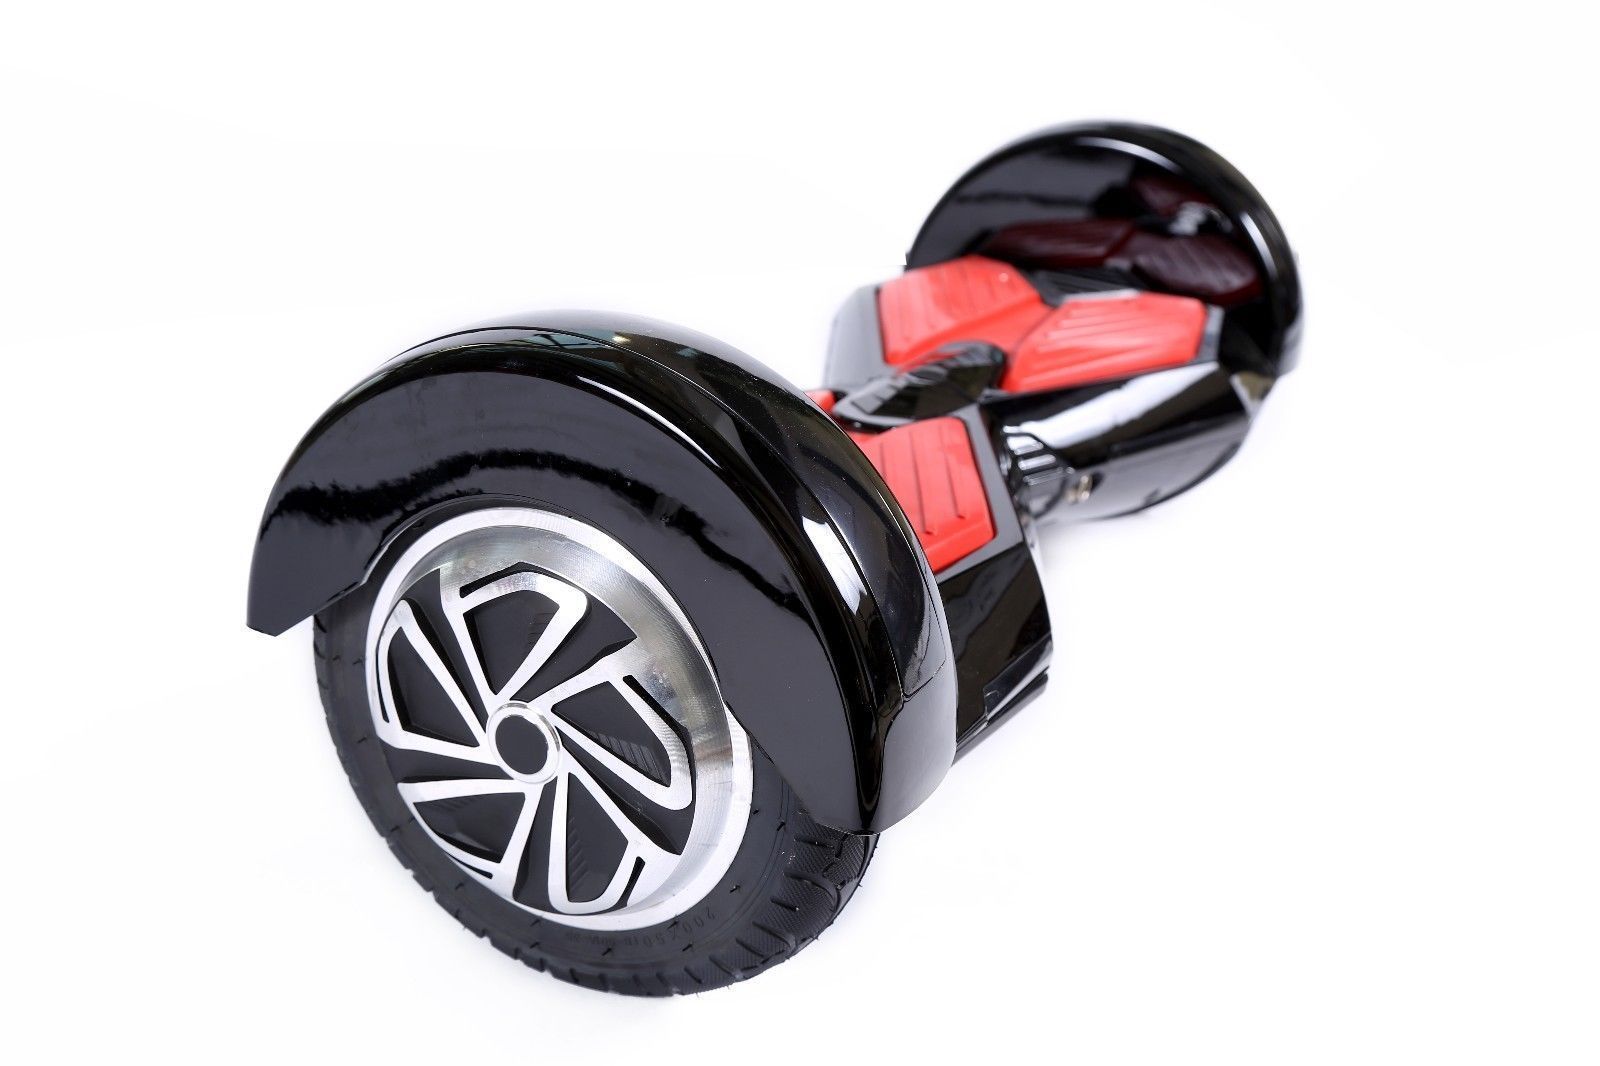 Black Lambo 8" Bluetooth Hoverboard Two Wheel Balance Scooter UL2272 - $279.00